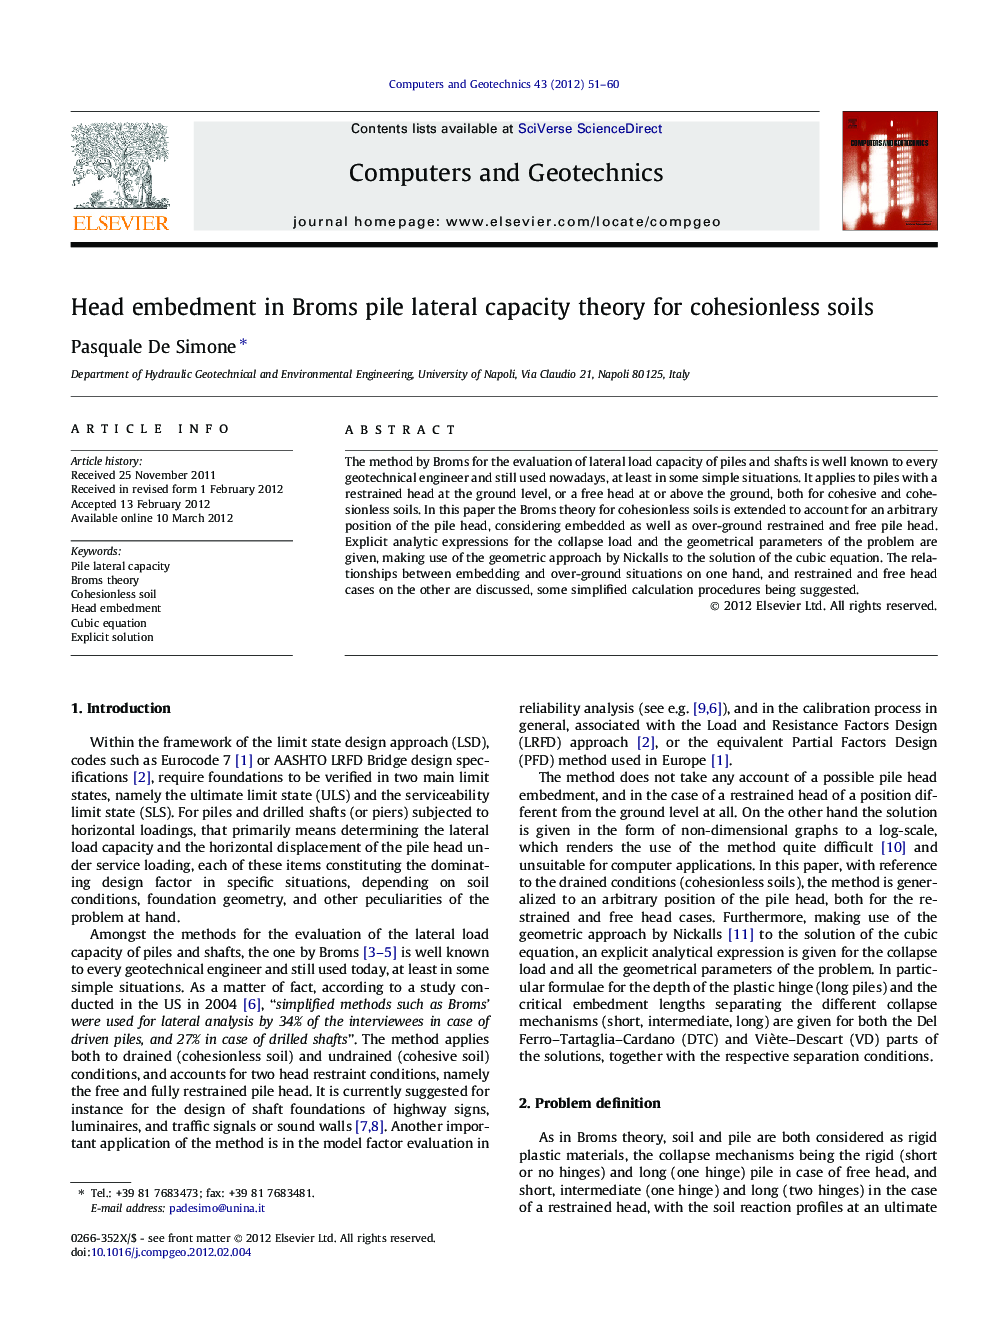 Head embedment in Broms pile lateral capacity theory for cohesionless soils